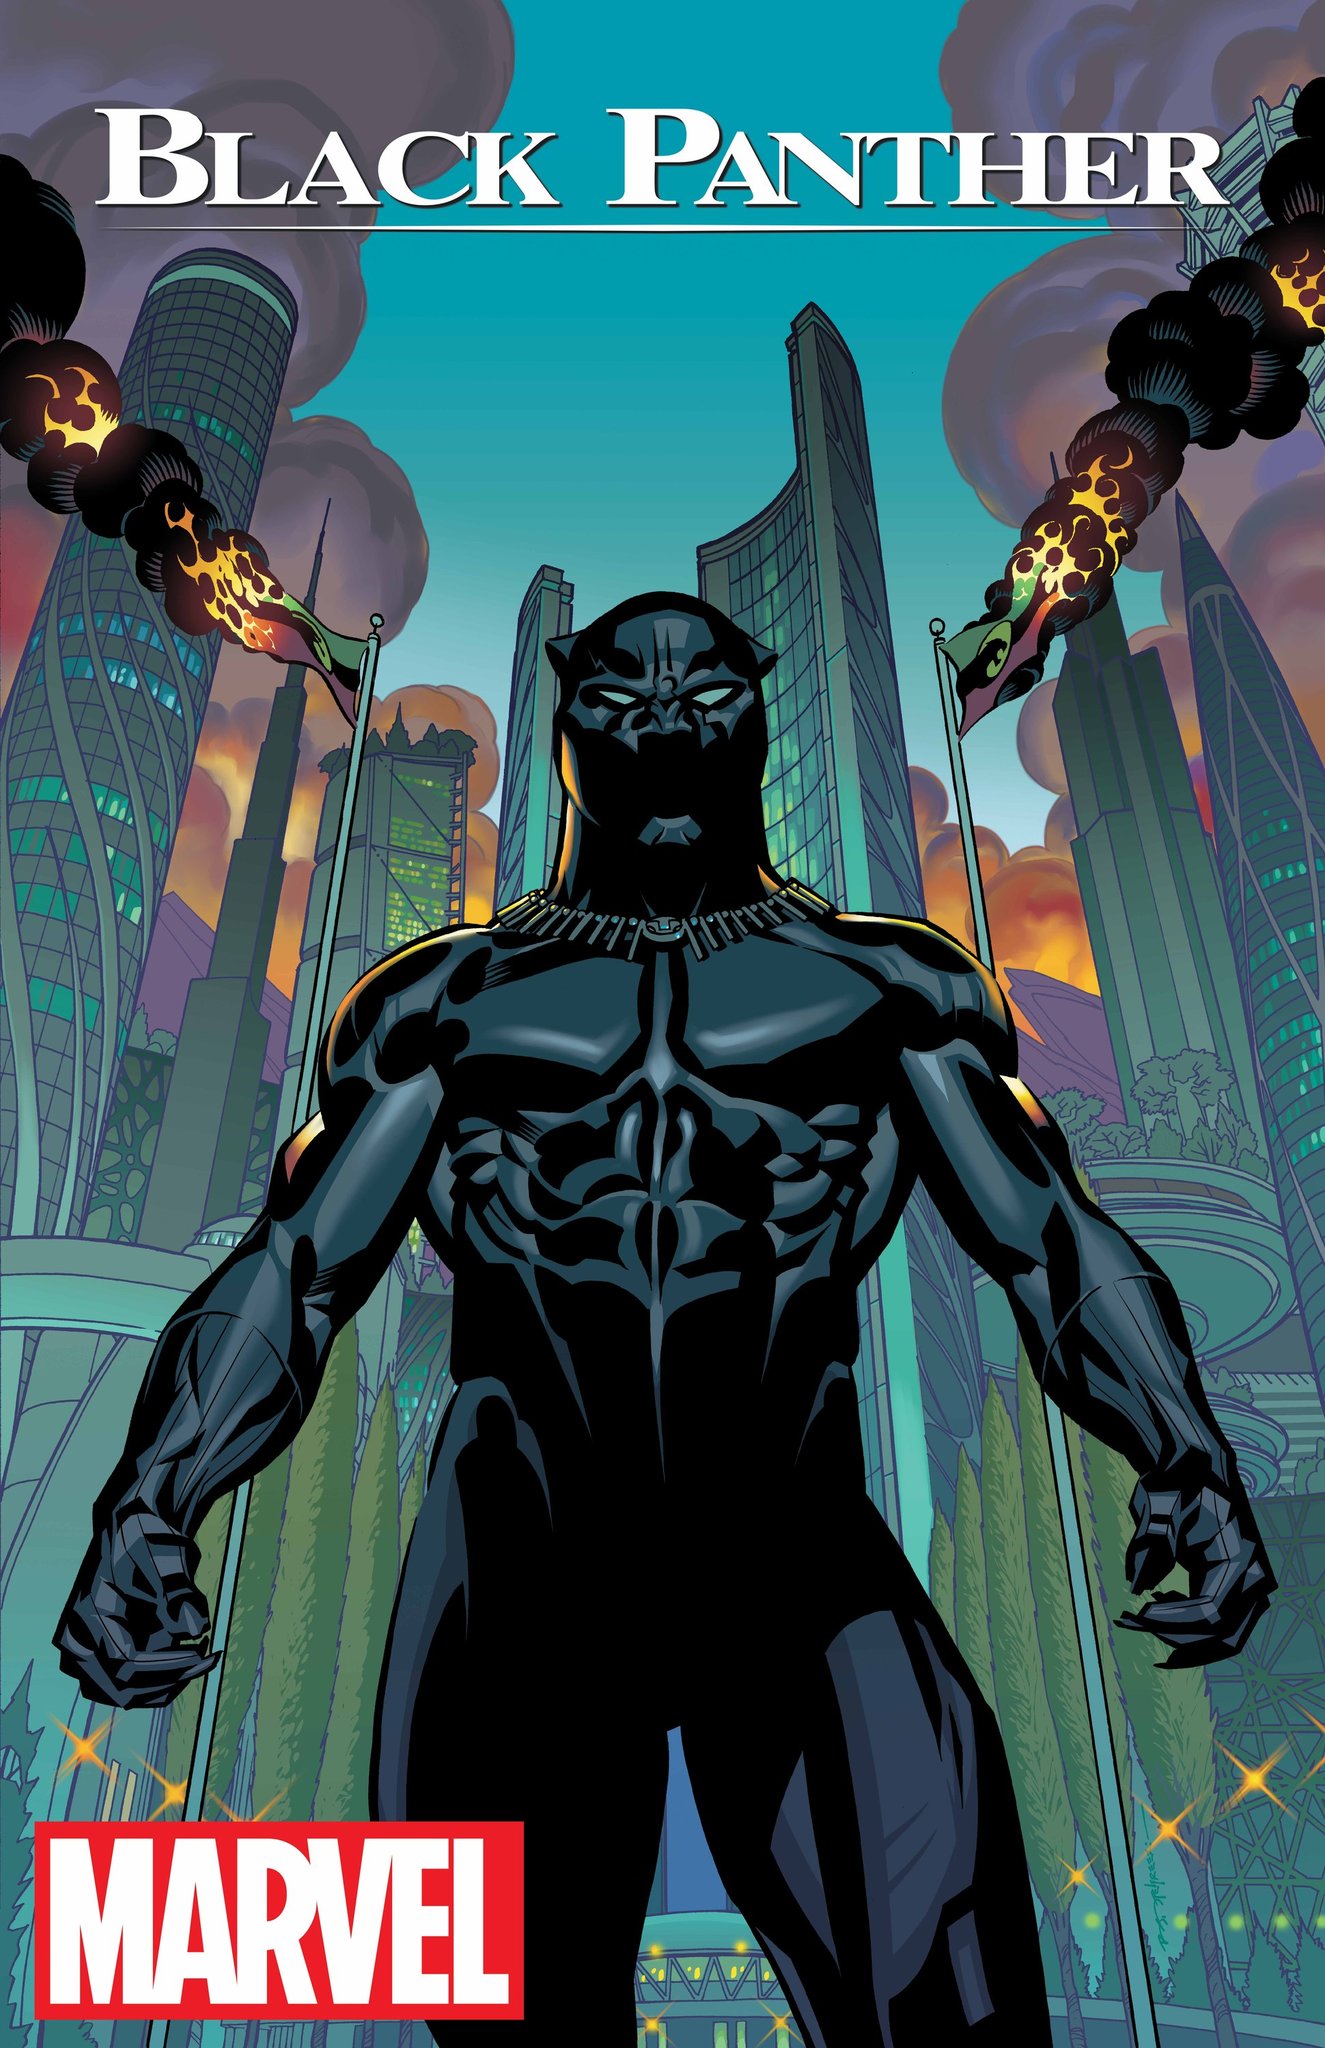 the-cover-of-black-panther-no-1-to-be-published-next-year-drawn-by-brian-stelfreeze